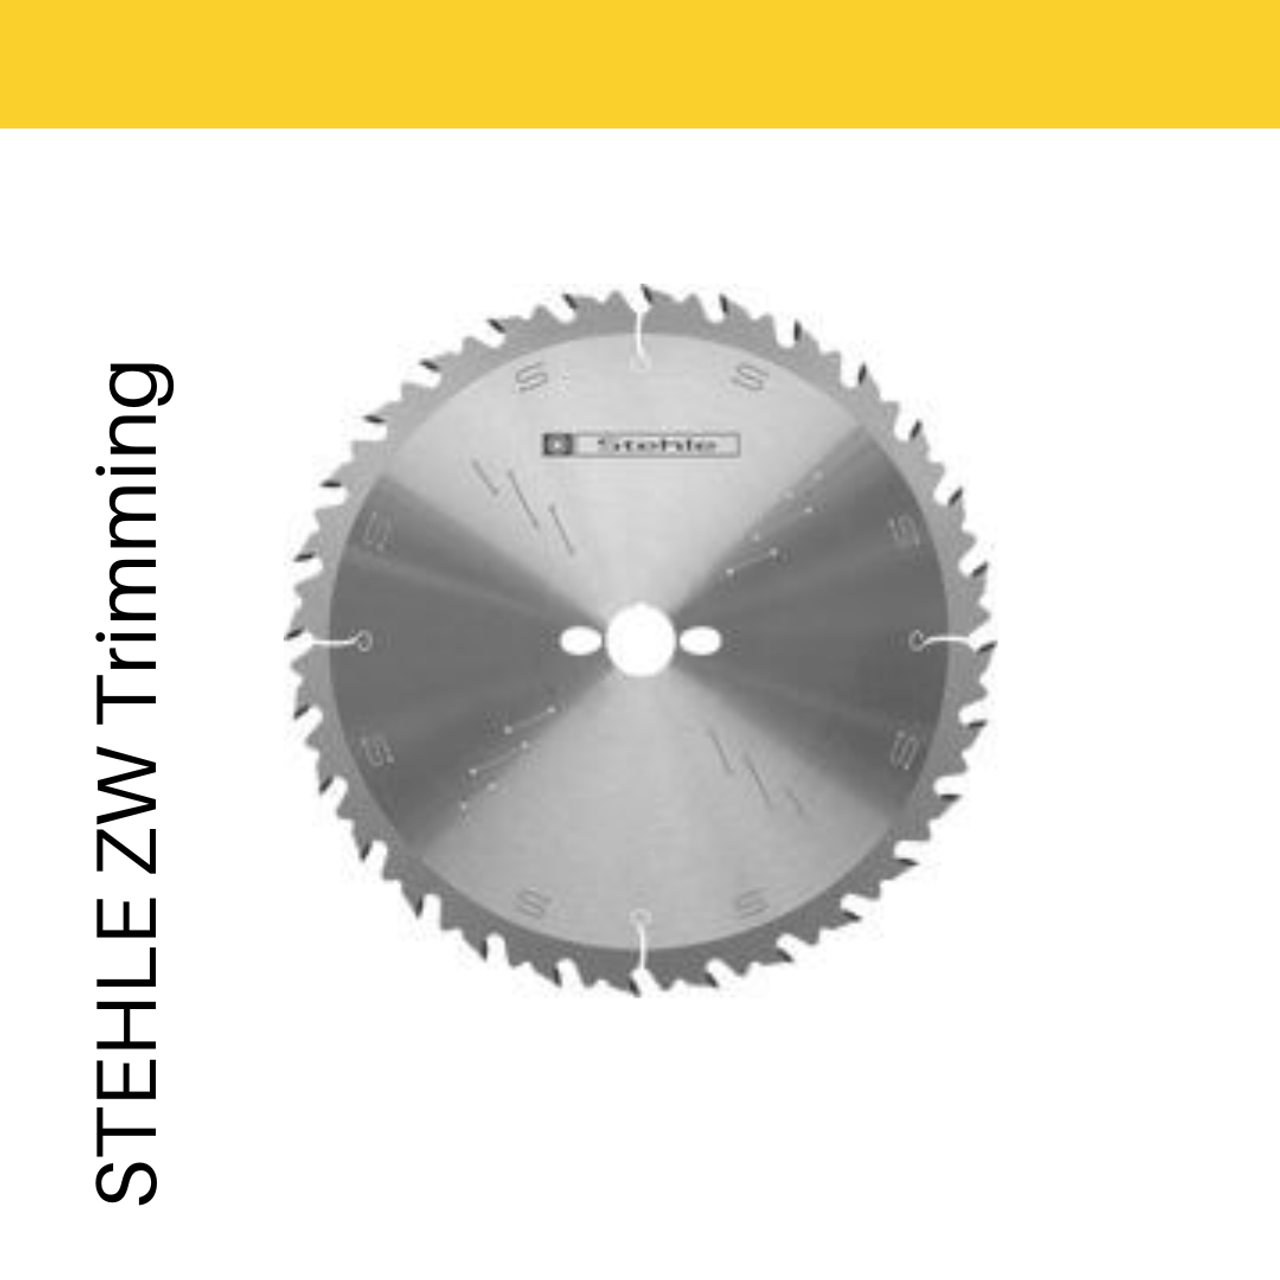 This is where you find STEHLE ATB ZW Saw Blade in a ⌀700 x 30 diameter and bore for Solid Timber in industry such as Carpentry in Australia